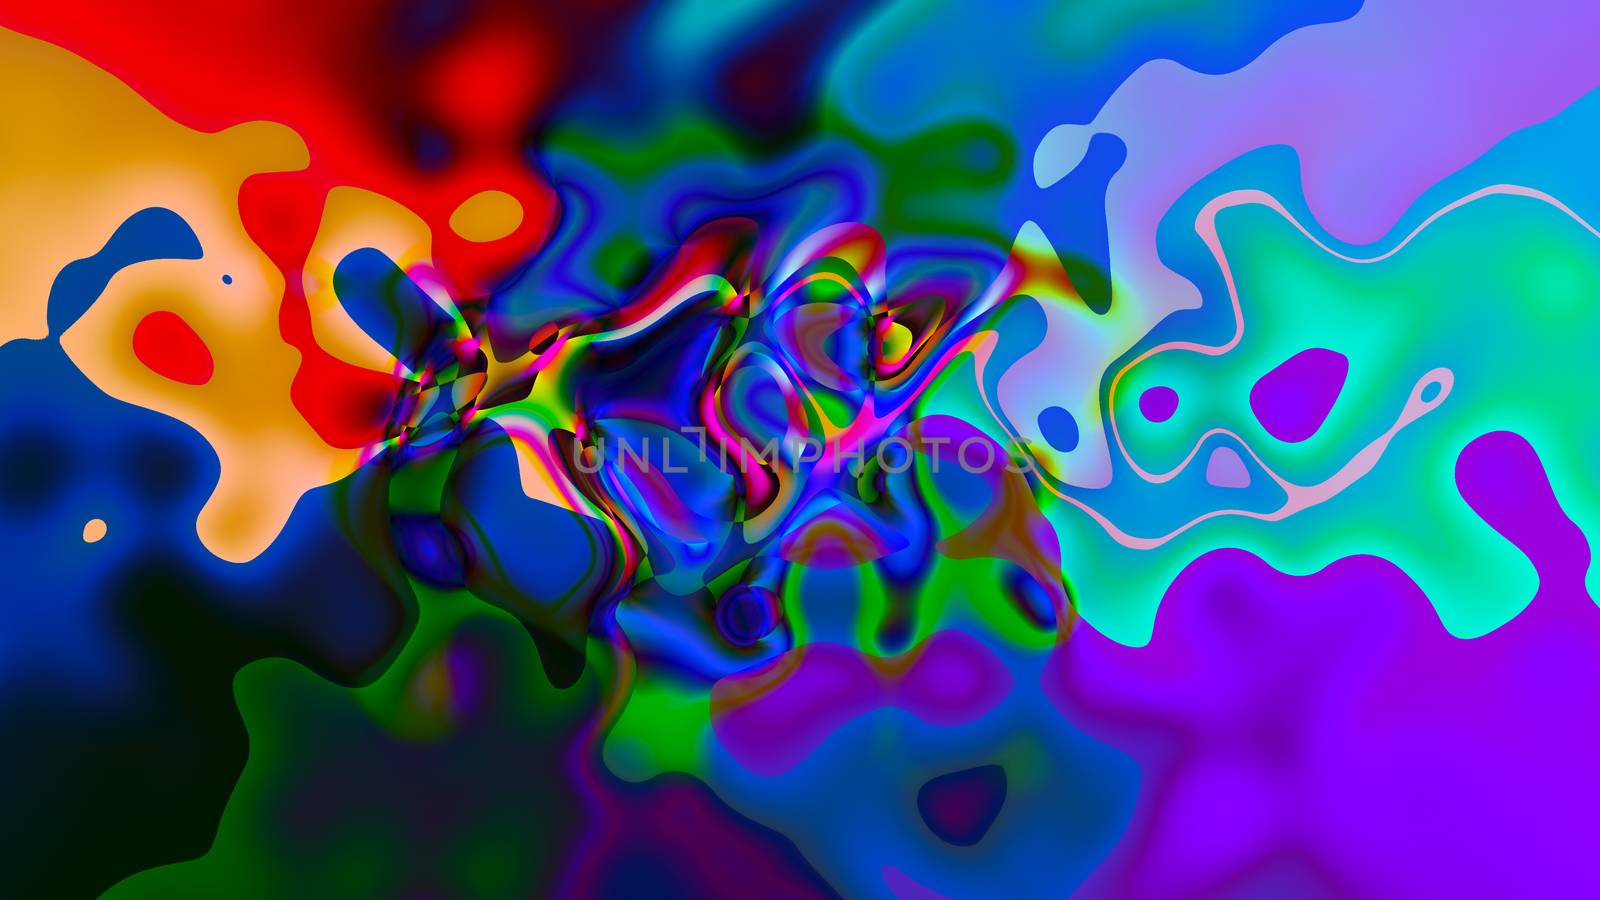 Abstract background with psychedelic art. 3d rendering